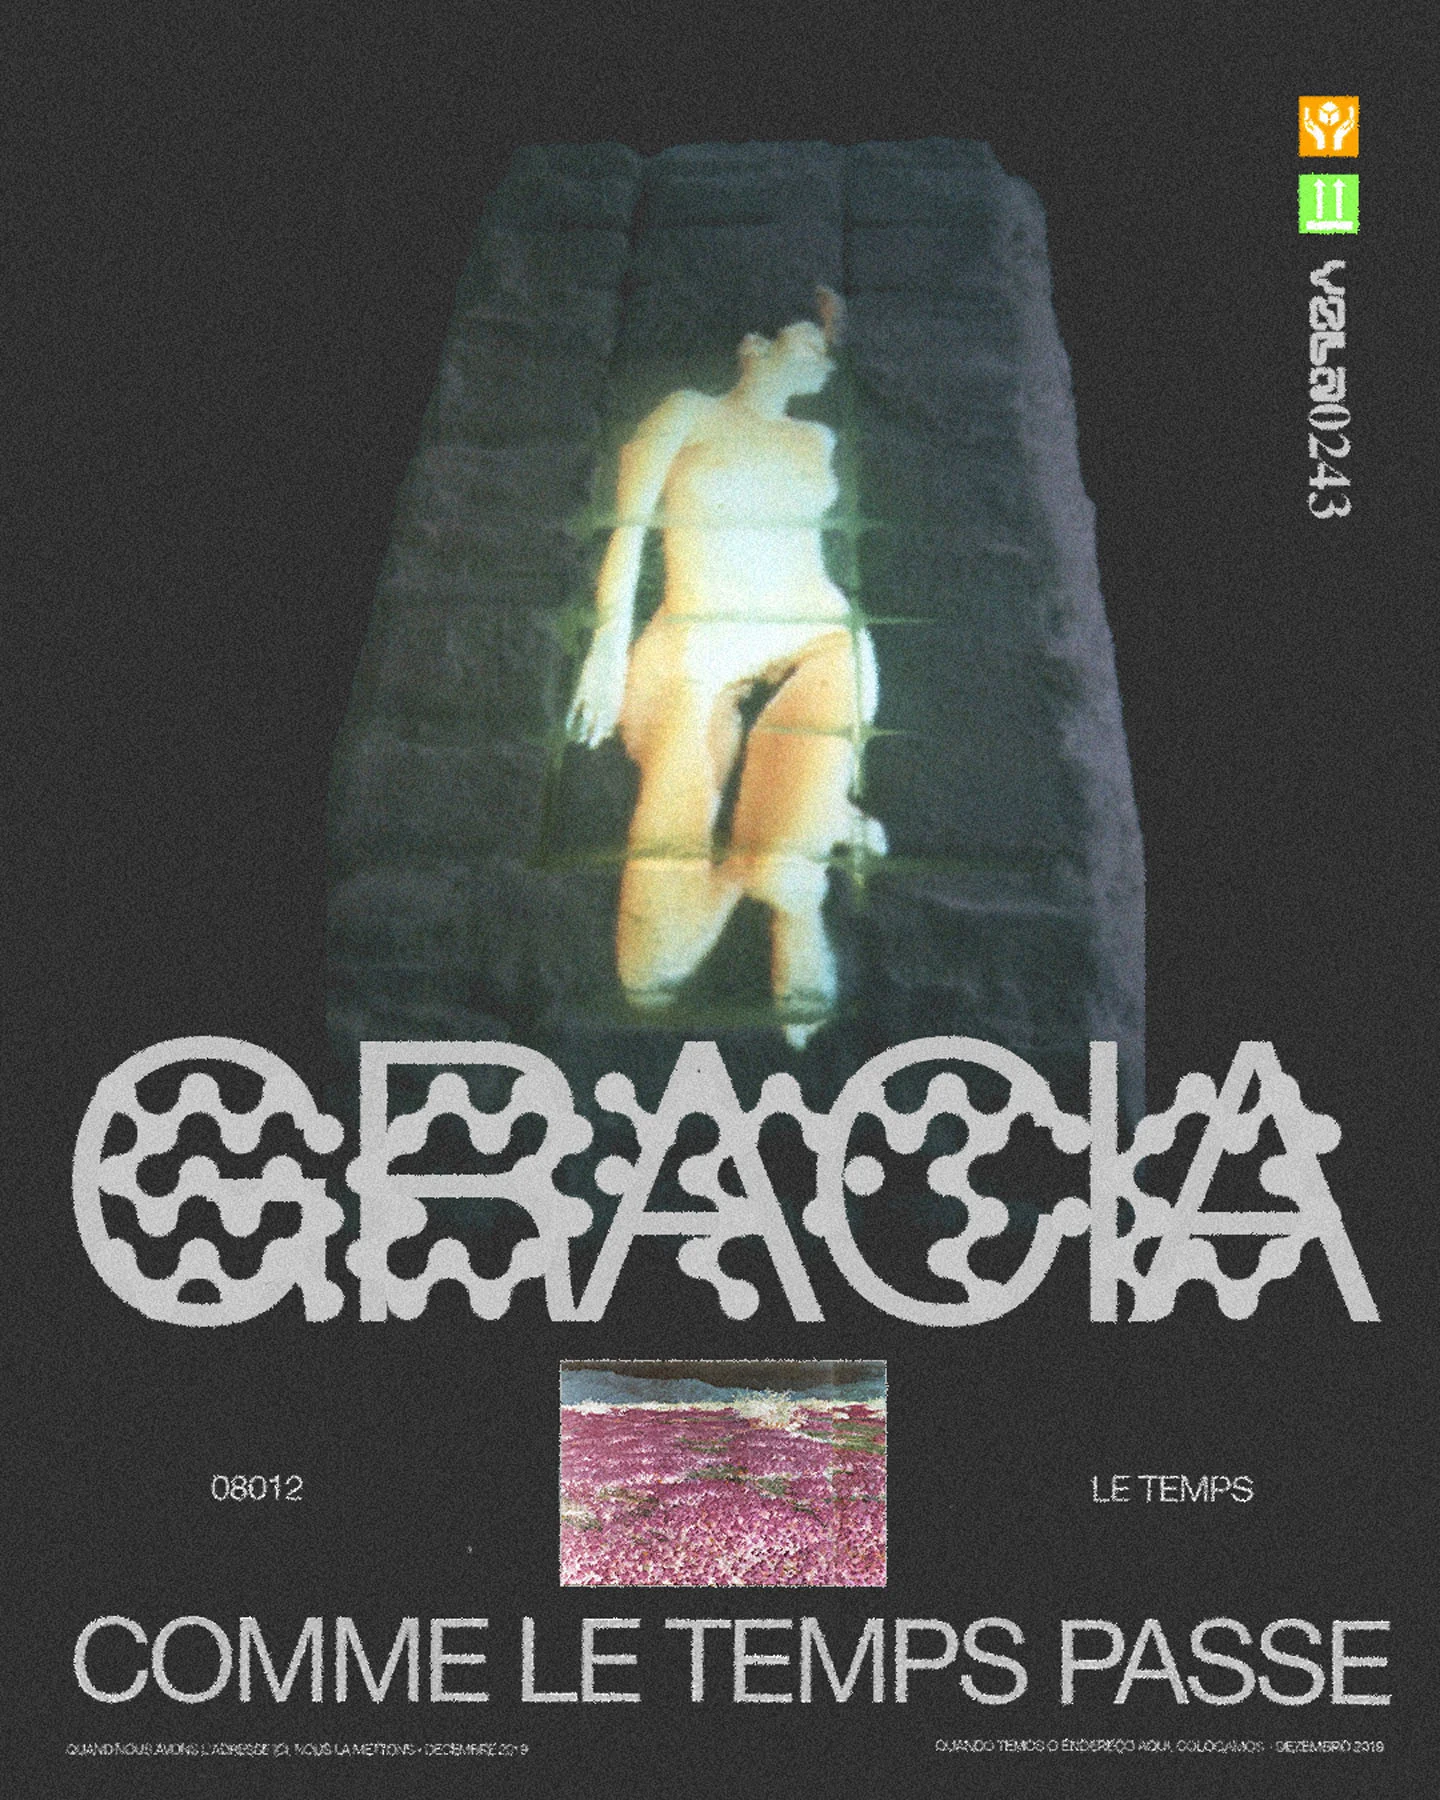 A graphic poster featuring a projected image of a classical statue on a dark stone wall. Below, the word "GRACIA" is styled in intricate typography. A small image of a flower field and the French phrase "Comme le temps passe" ("As time passes") are at the bottom.